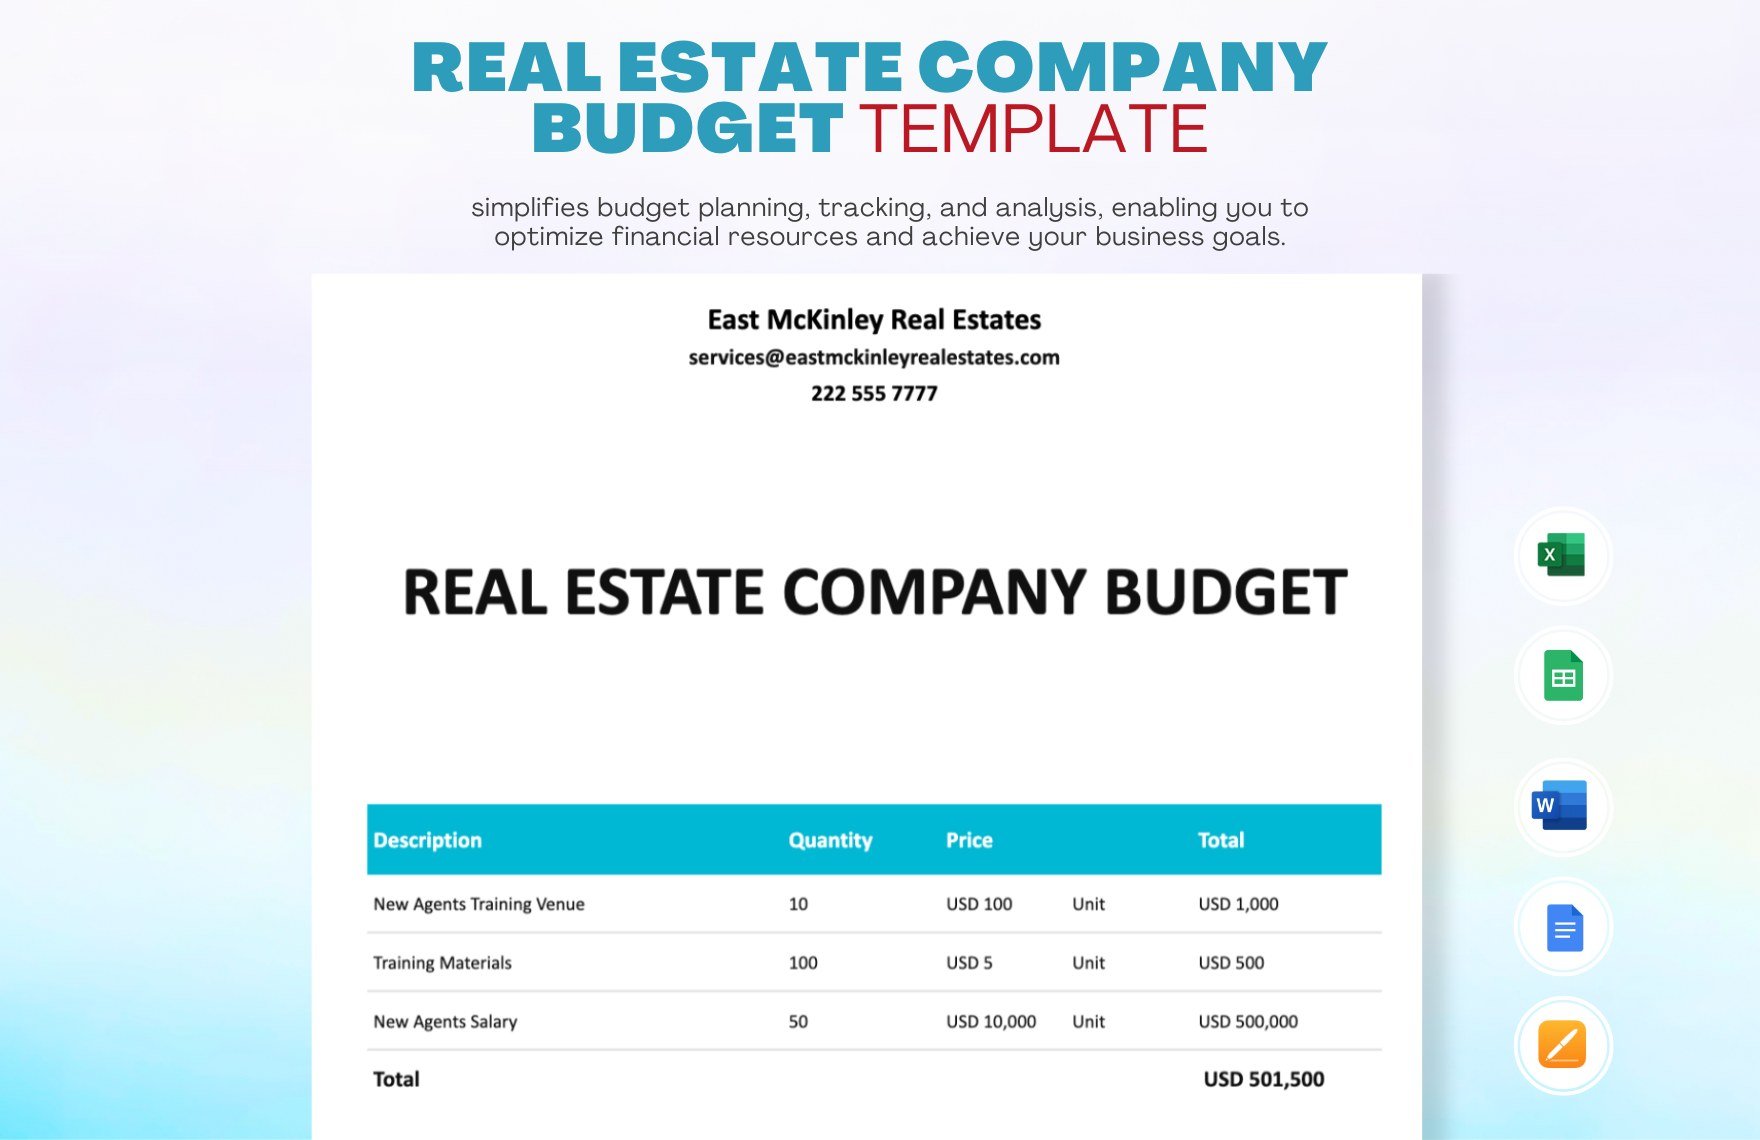 Real Estate Company Budget Template in Word, Google Docs, Excel, Google Sheets, Apple Pages